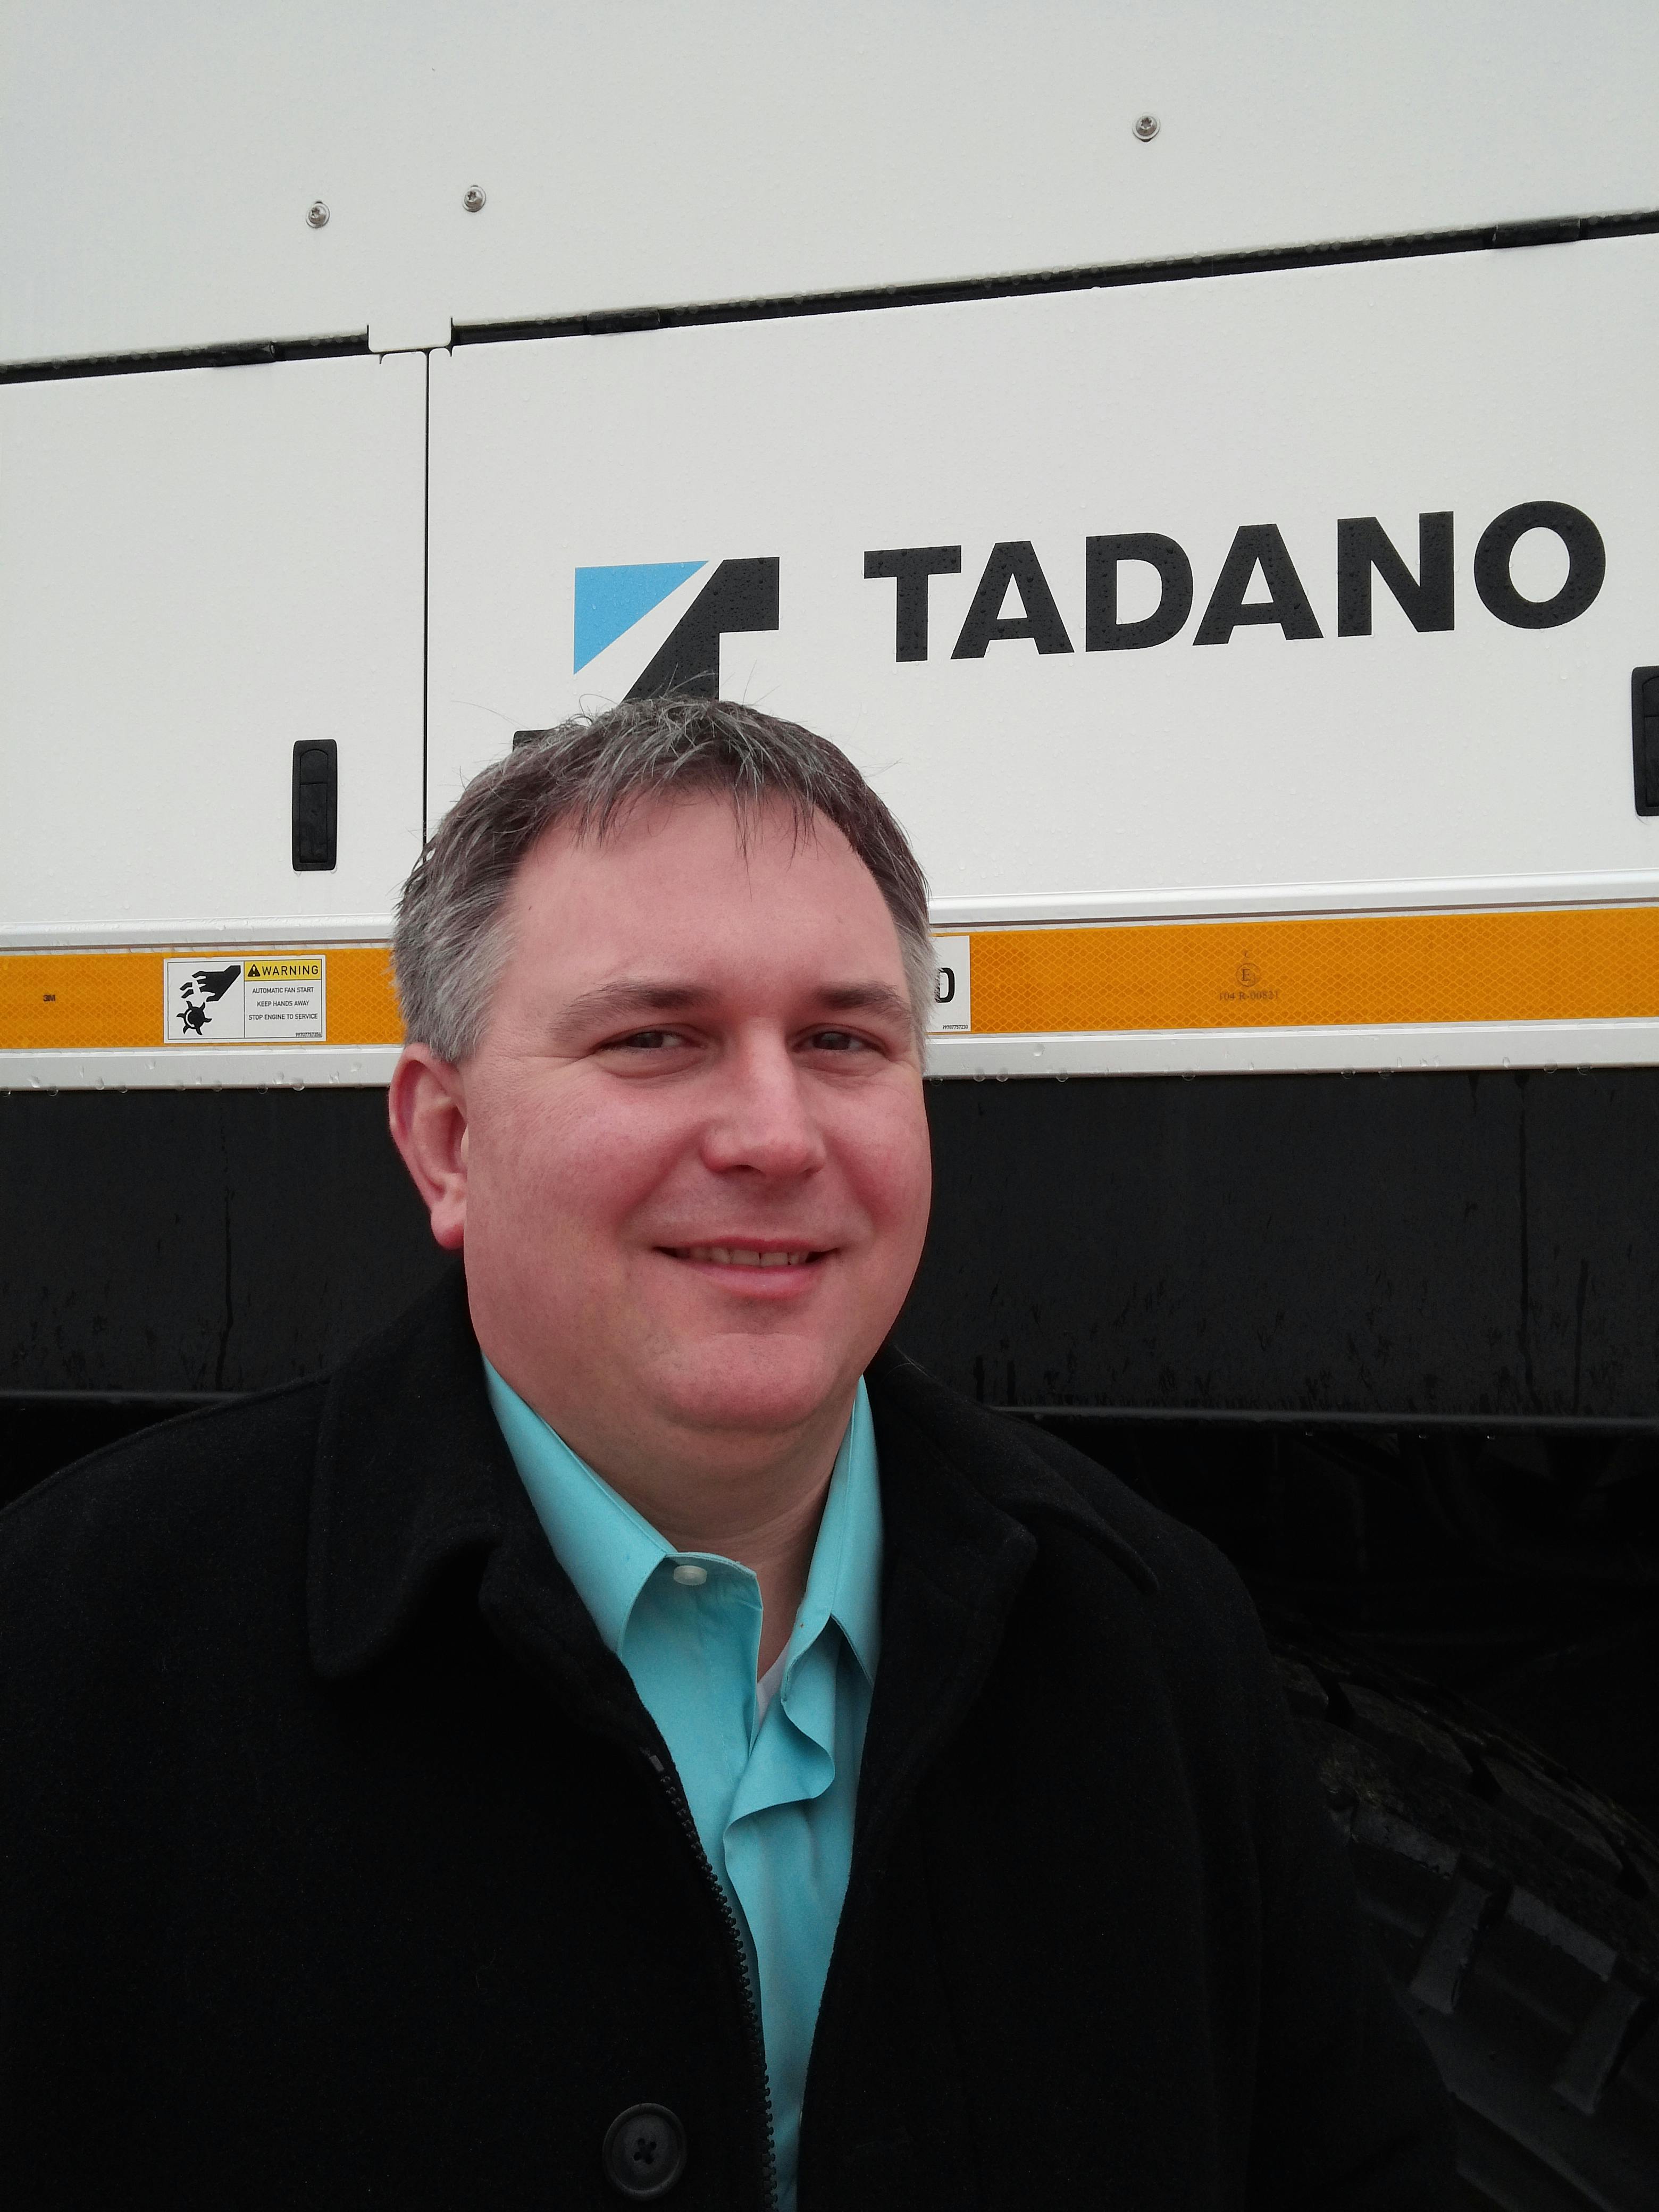 Tadano America Adds to Its Sales Team | Construction News